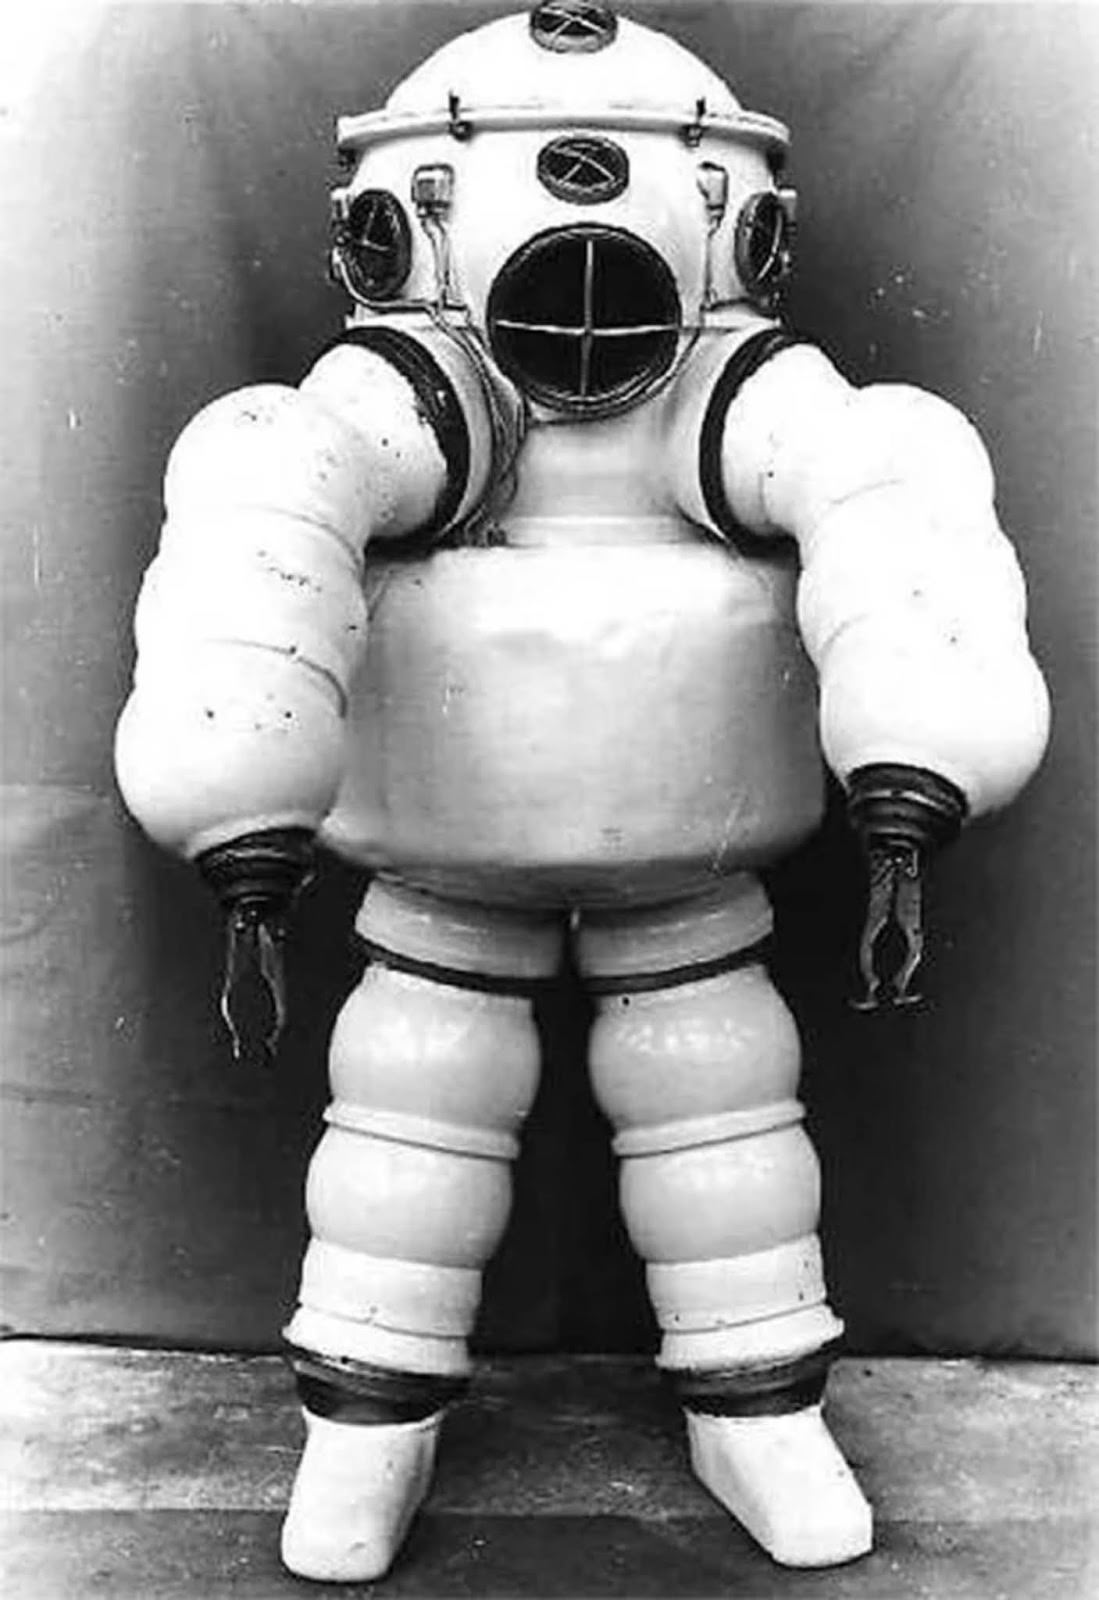 Neufeldt-Kuhnke suit. This third generation shell (produced between 1929-1940) with a closed circuit breathing system was safe up to a depth of 525 feet (160 m), and had a telephone.